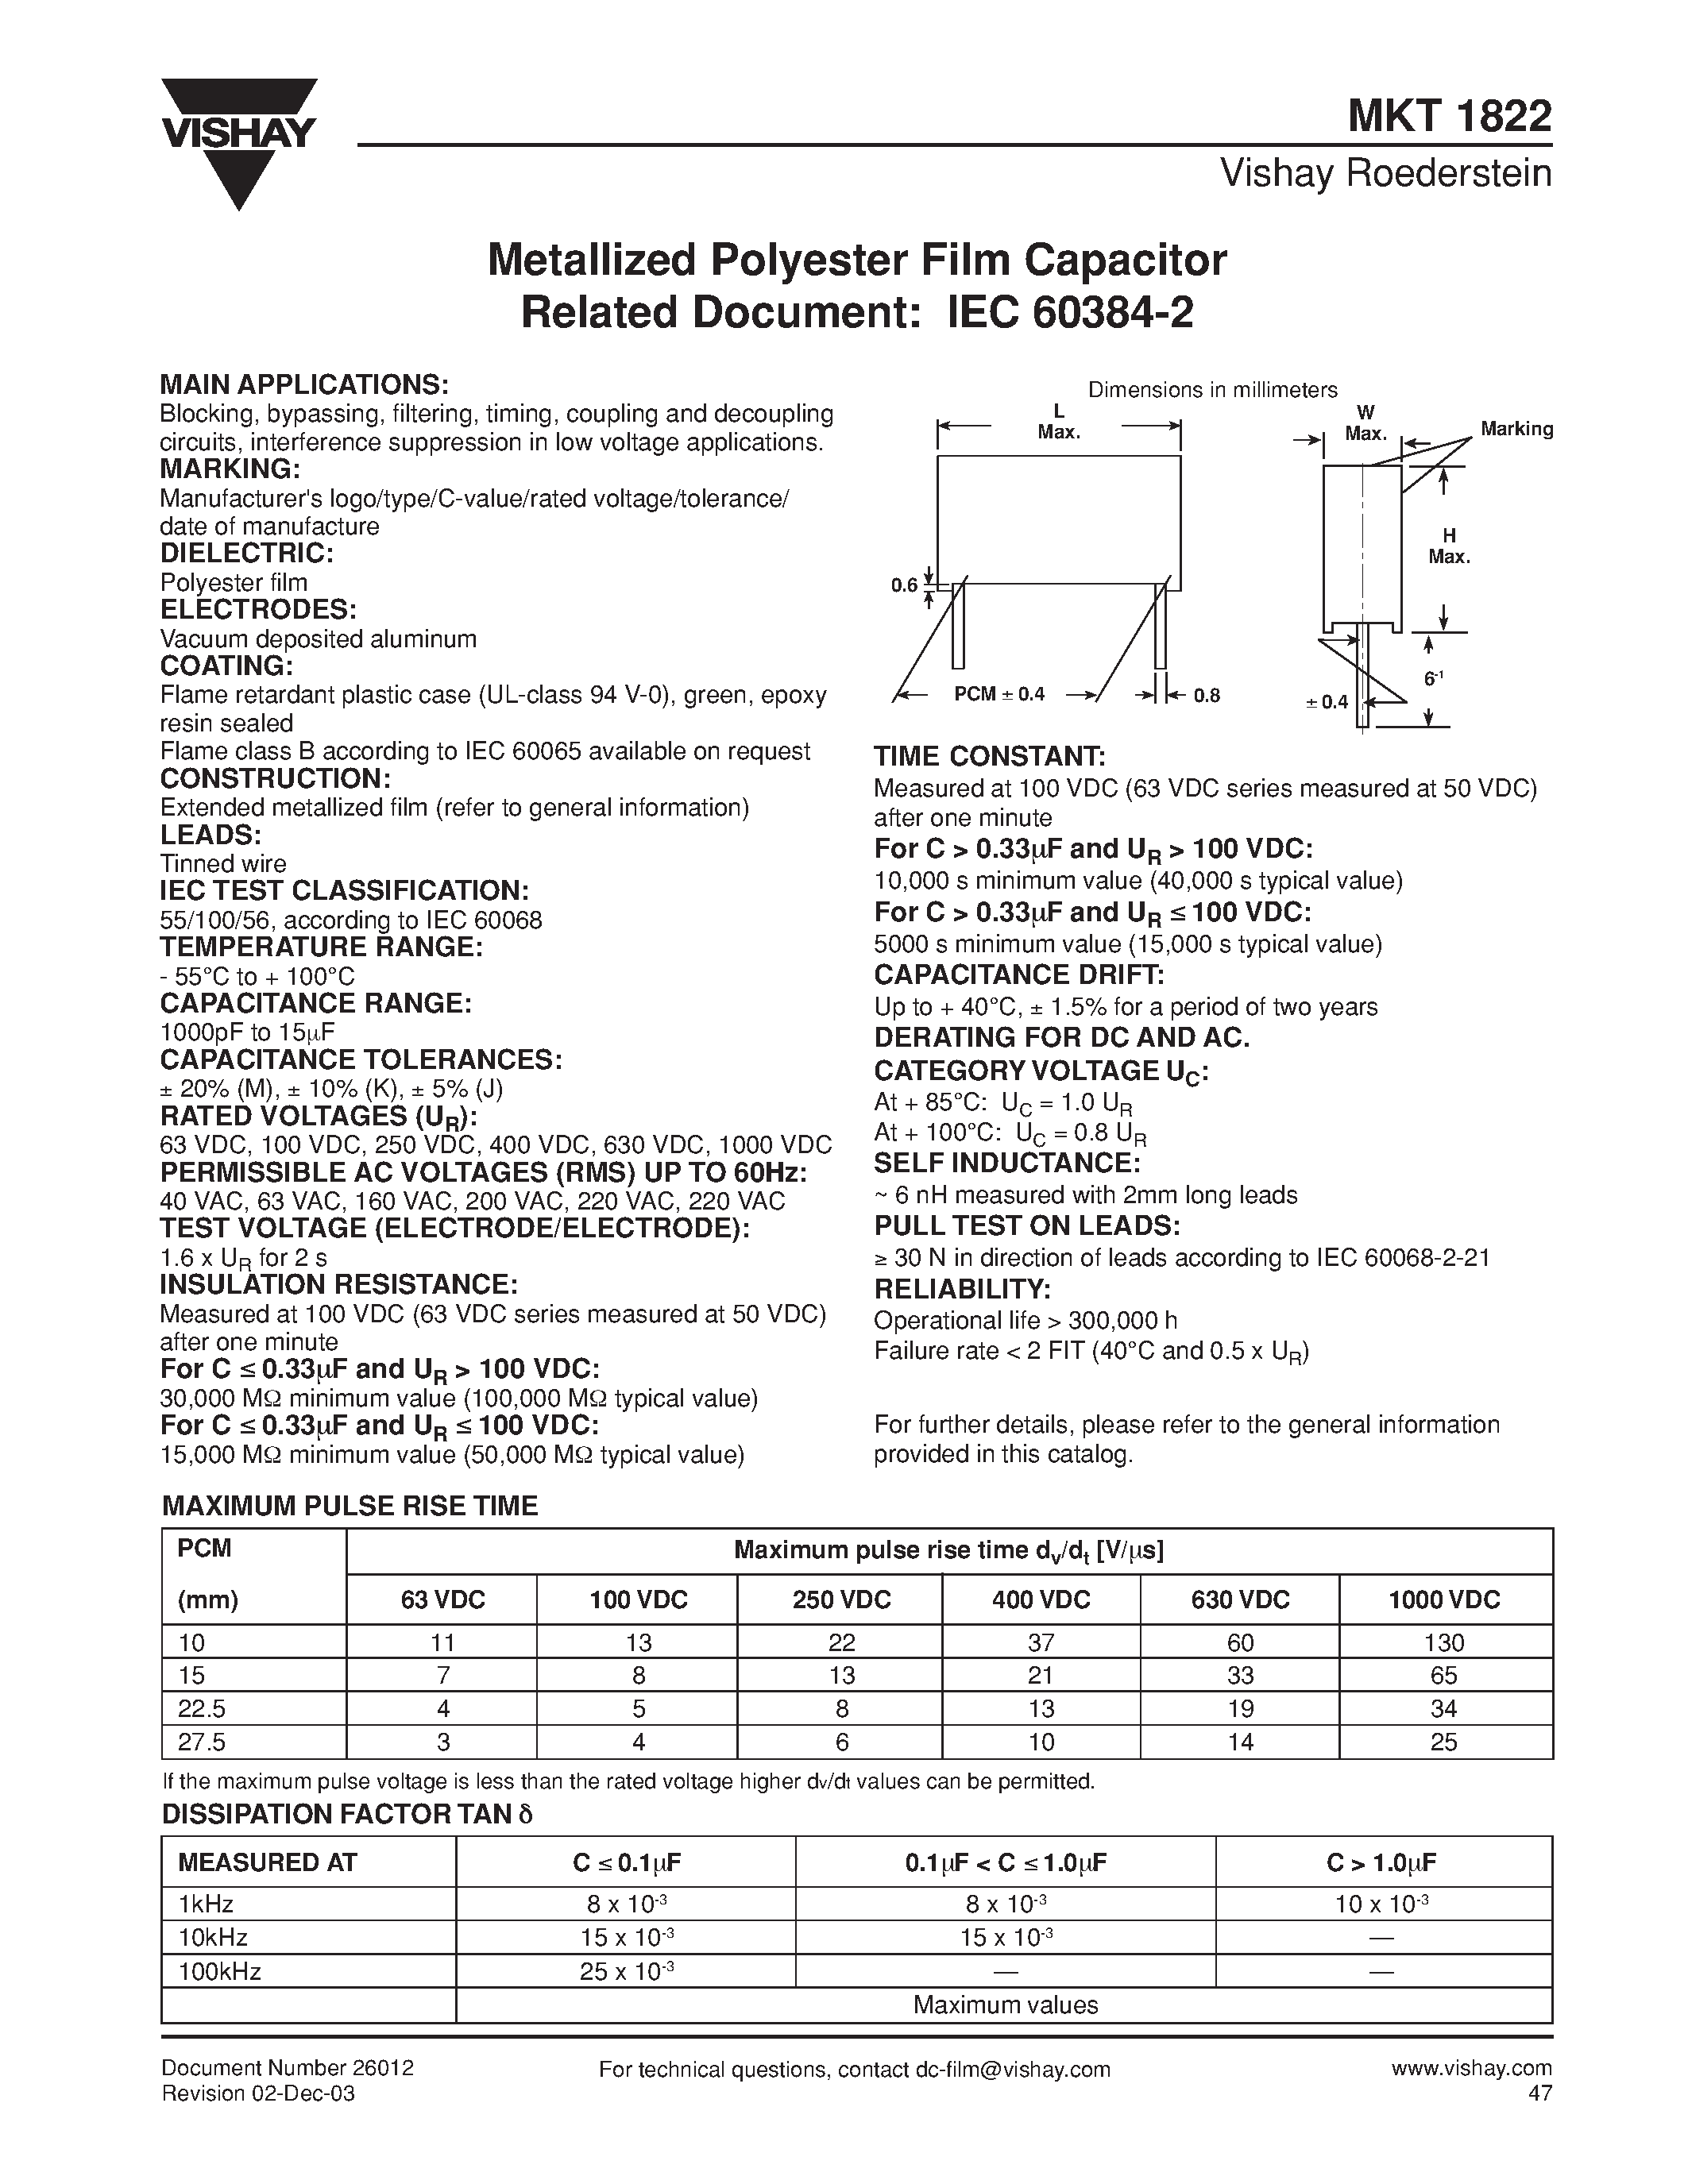 Даташит MKT1822-510-255-V - Metallized Polyester Film Capacitor Related Document: IEC 60384-2 страница 1